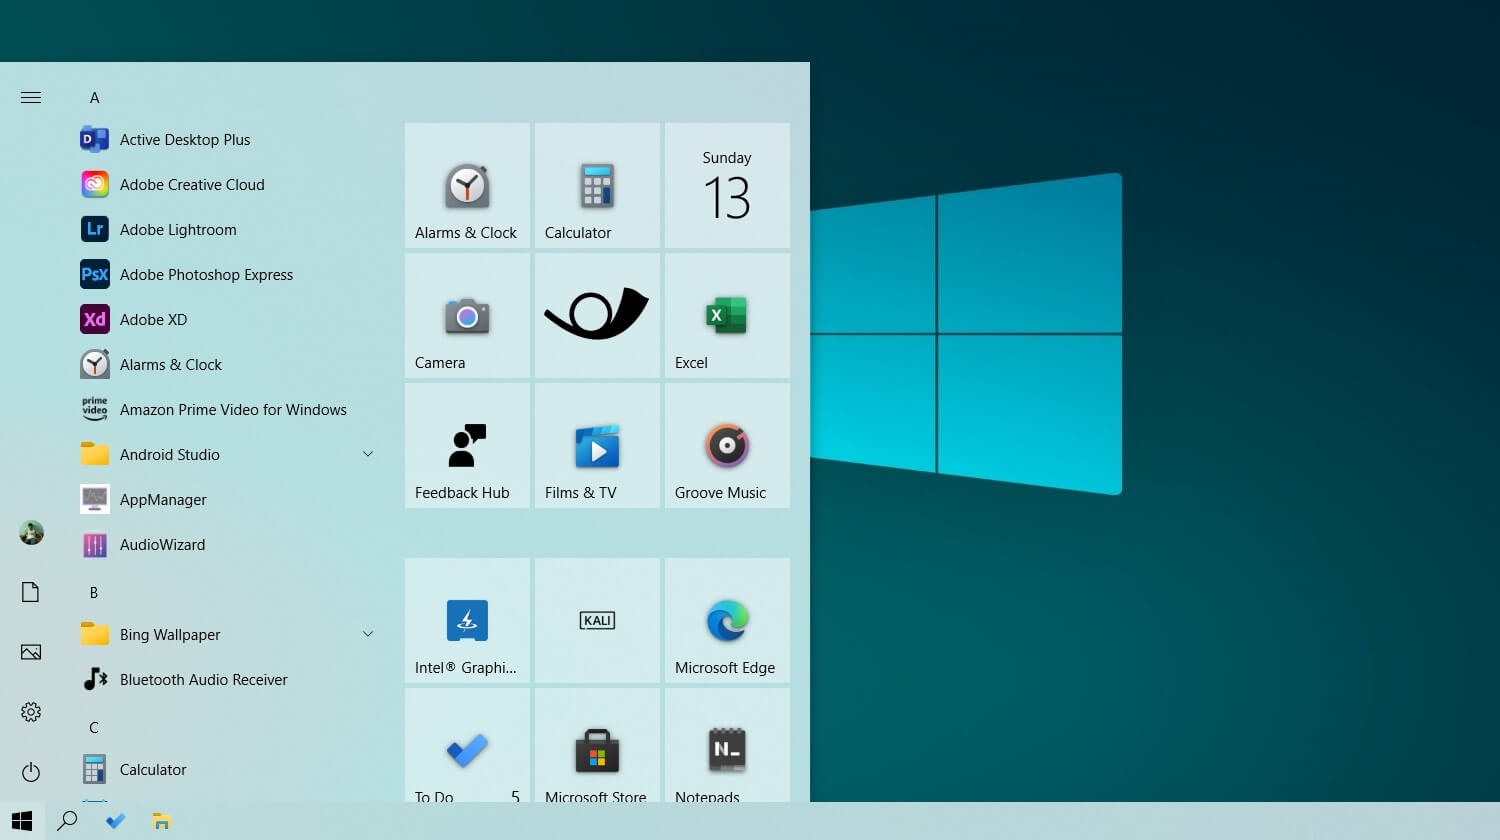 How to unlock and use Windows 10 20H2 features without upgrading New-Start-Menu-in-light-theme.jpg